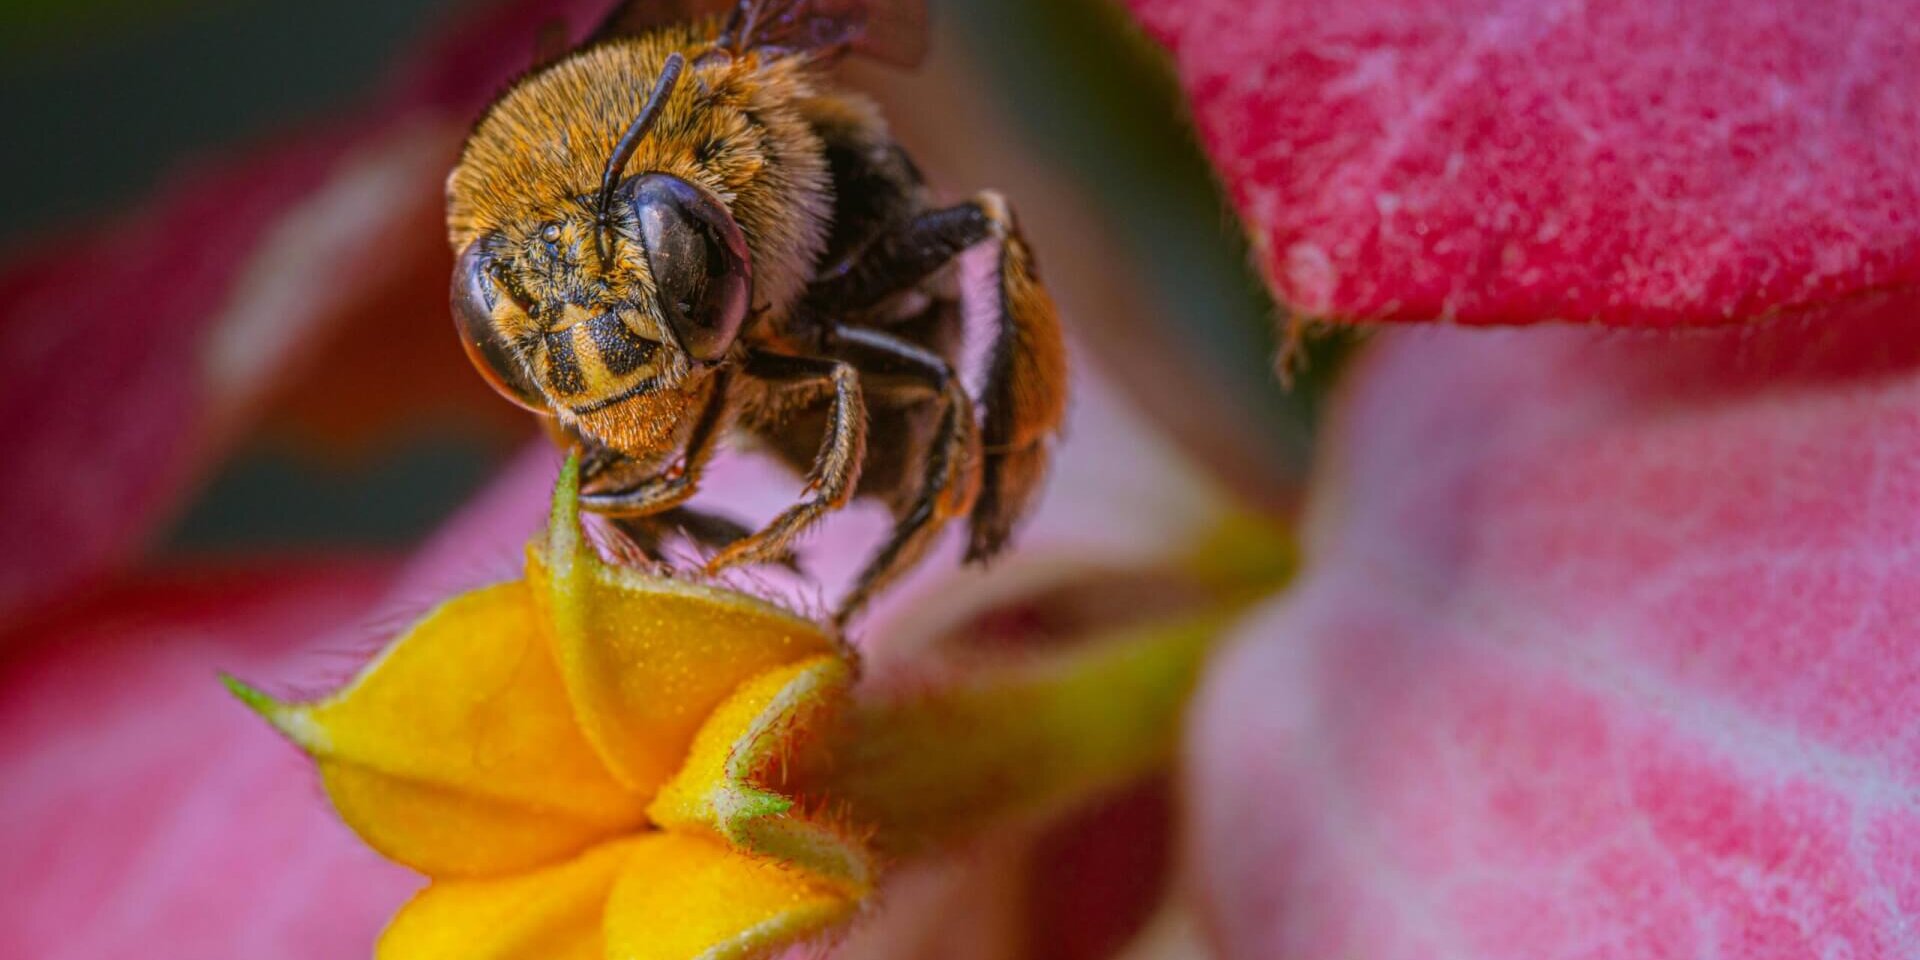 A bee trying to pollinate a flower